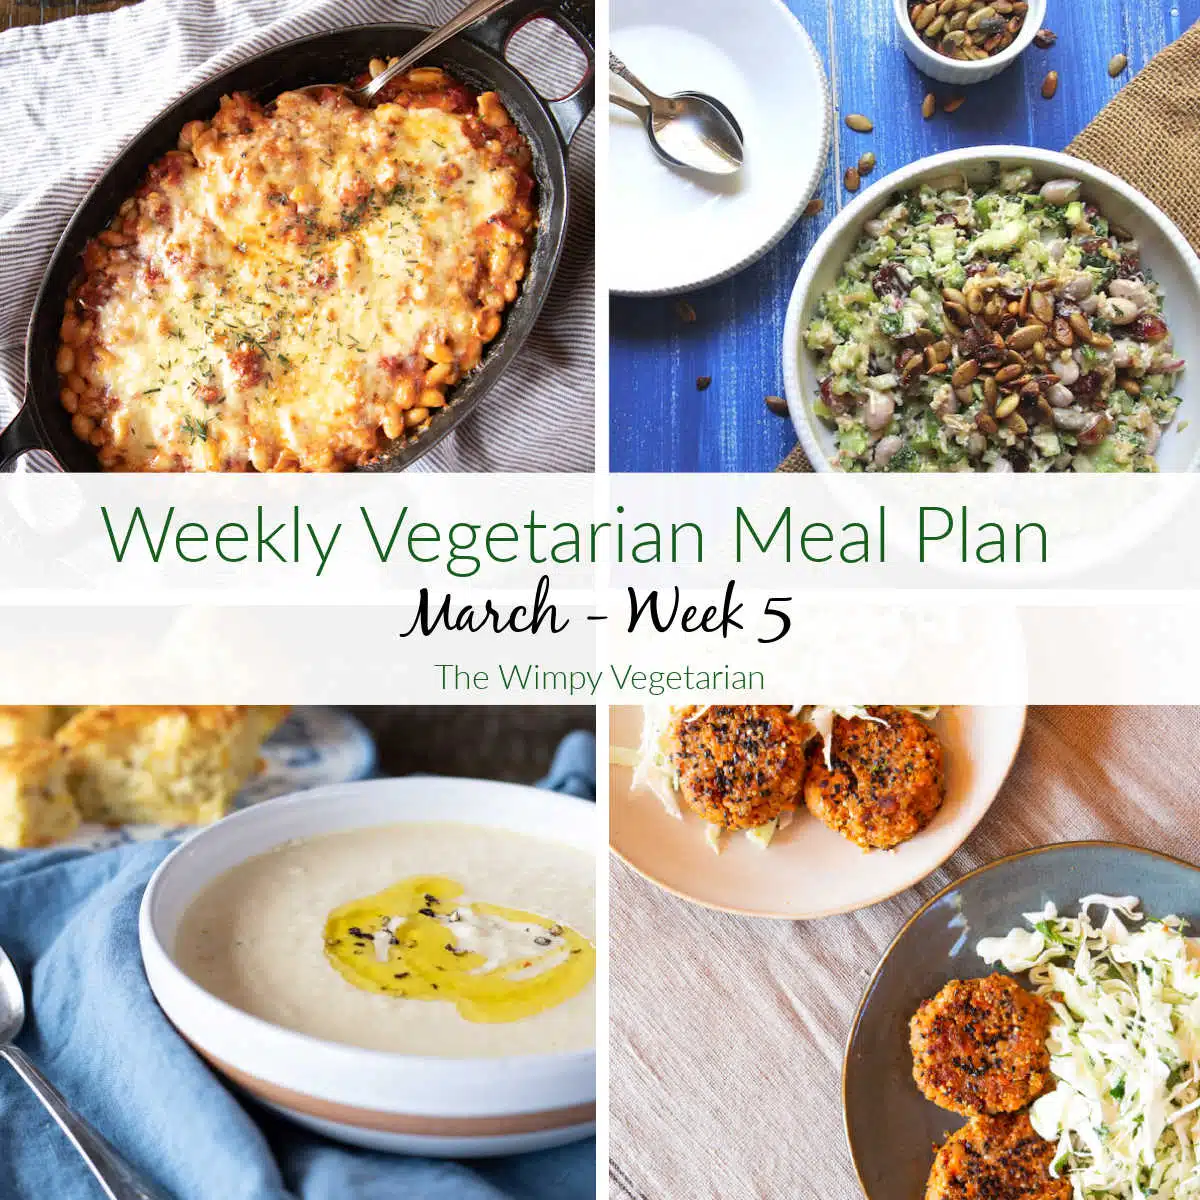 Four vegetarian dinners for the coming week including a cheesy casserole, broccoli salad, and cauliflower soup, with text overlay.